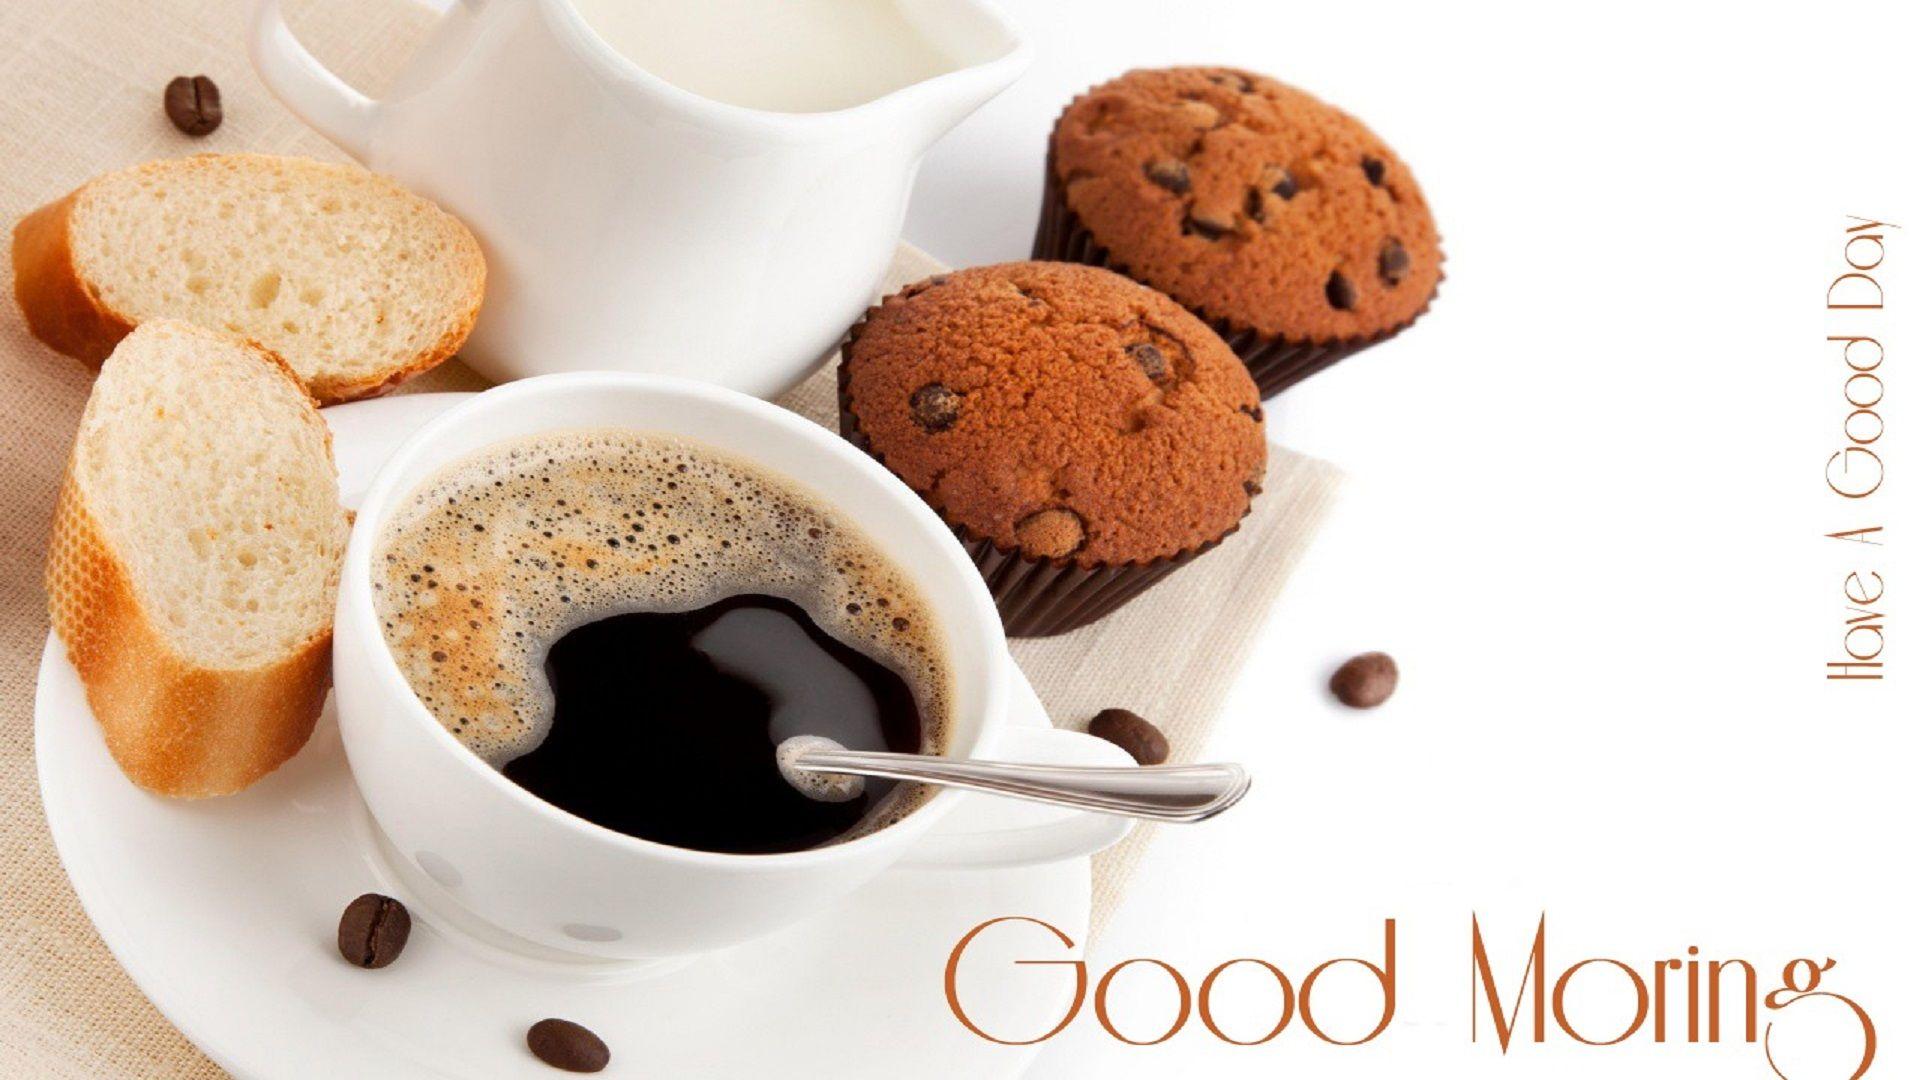 Good Morning Wishes Hd Have A Nice Day Free Wallpaper